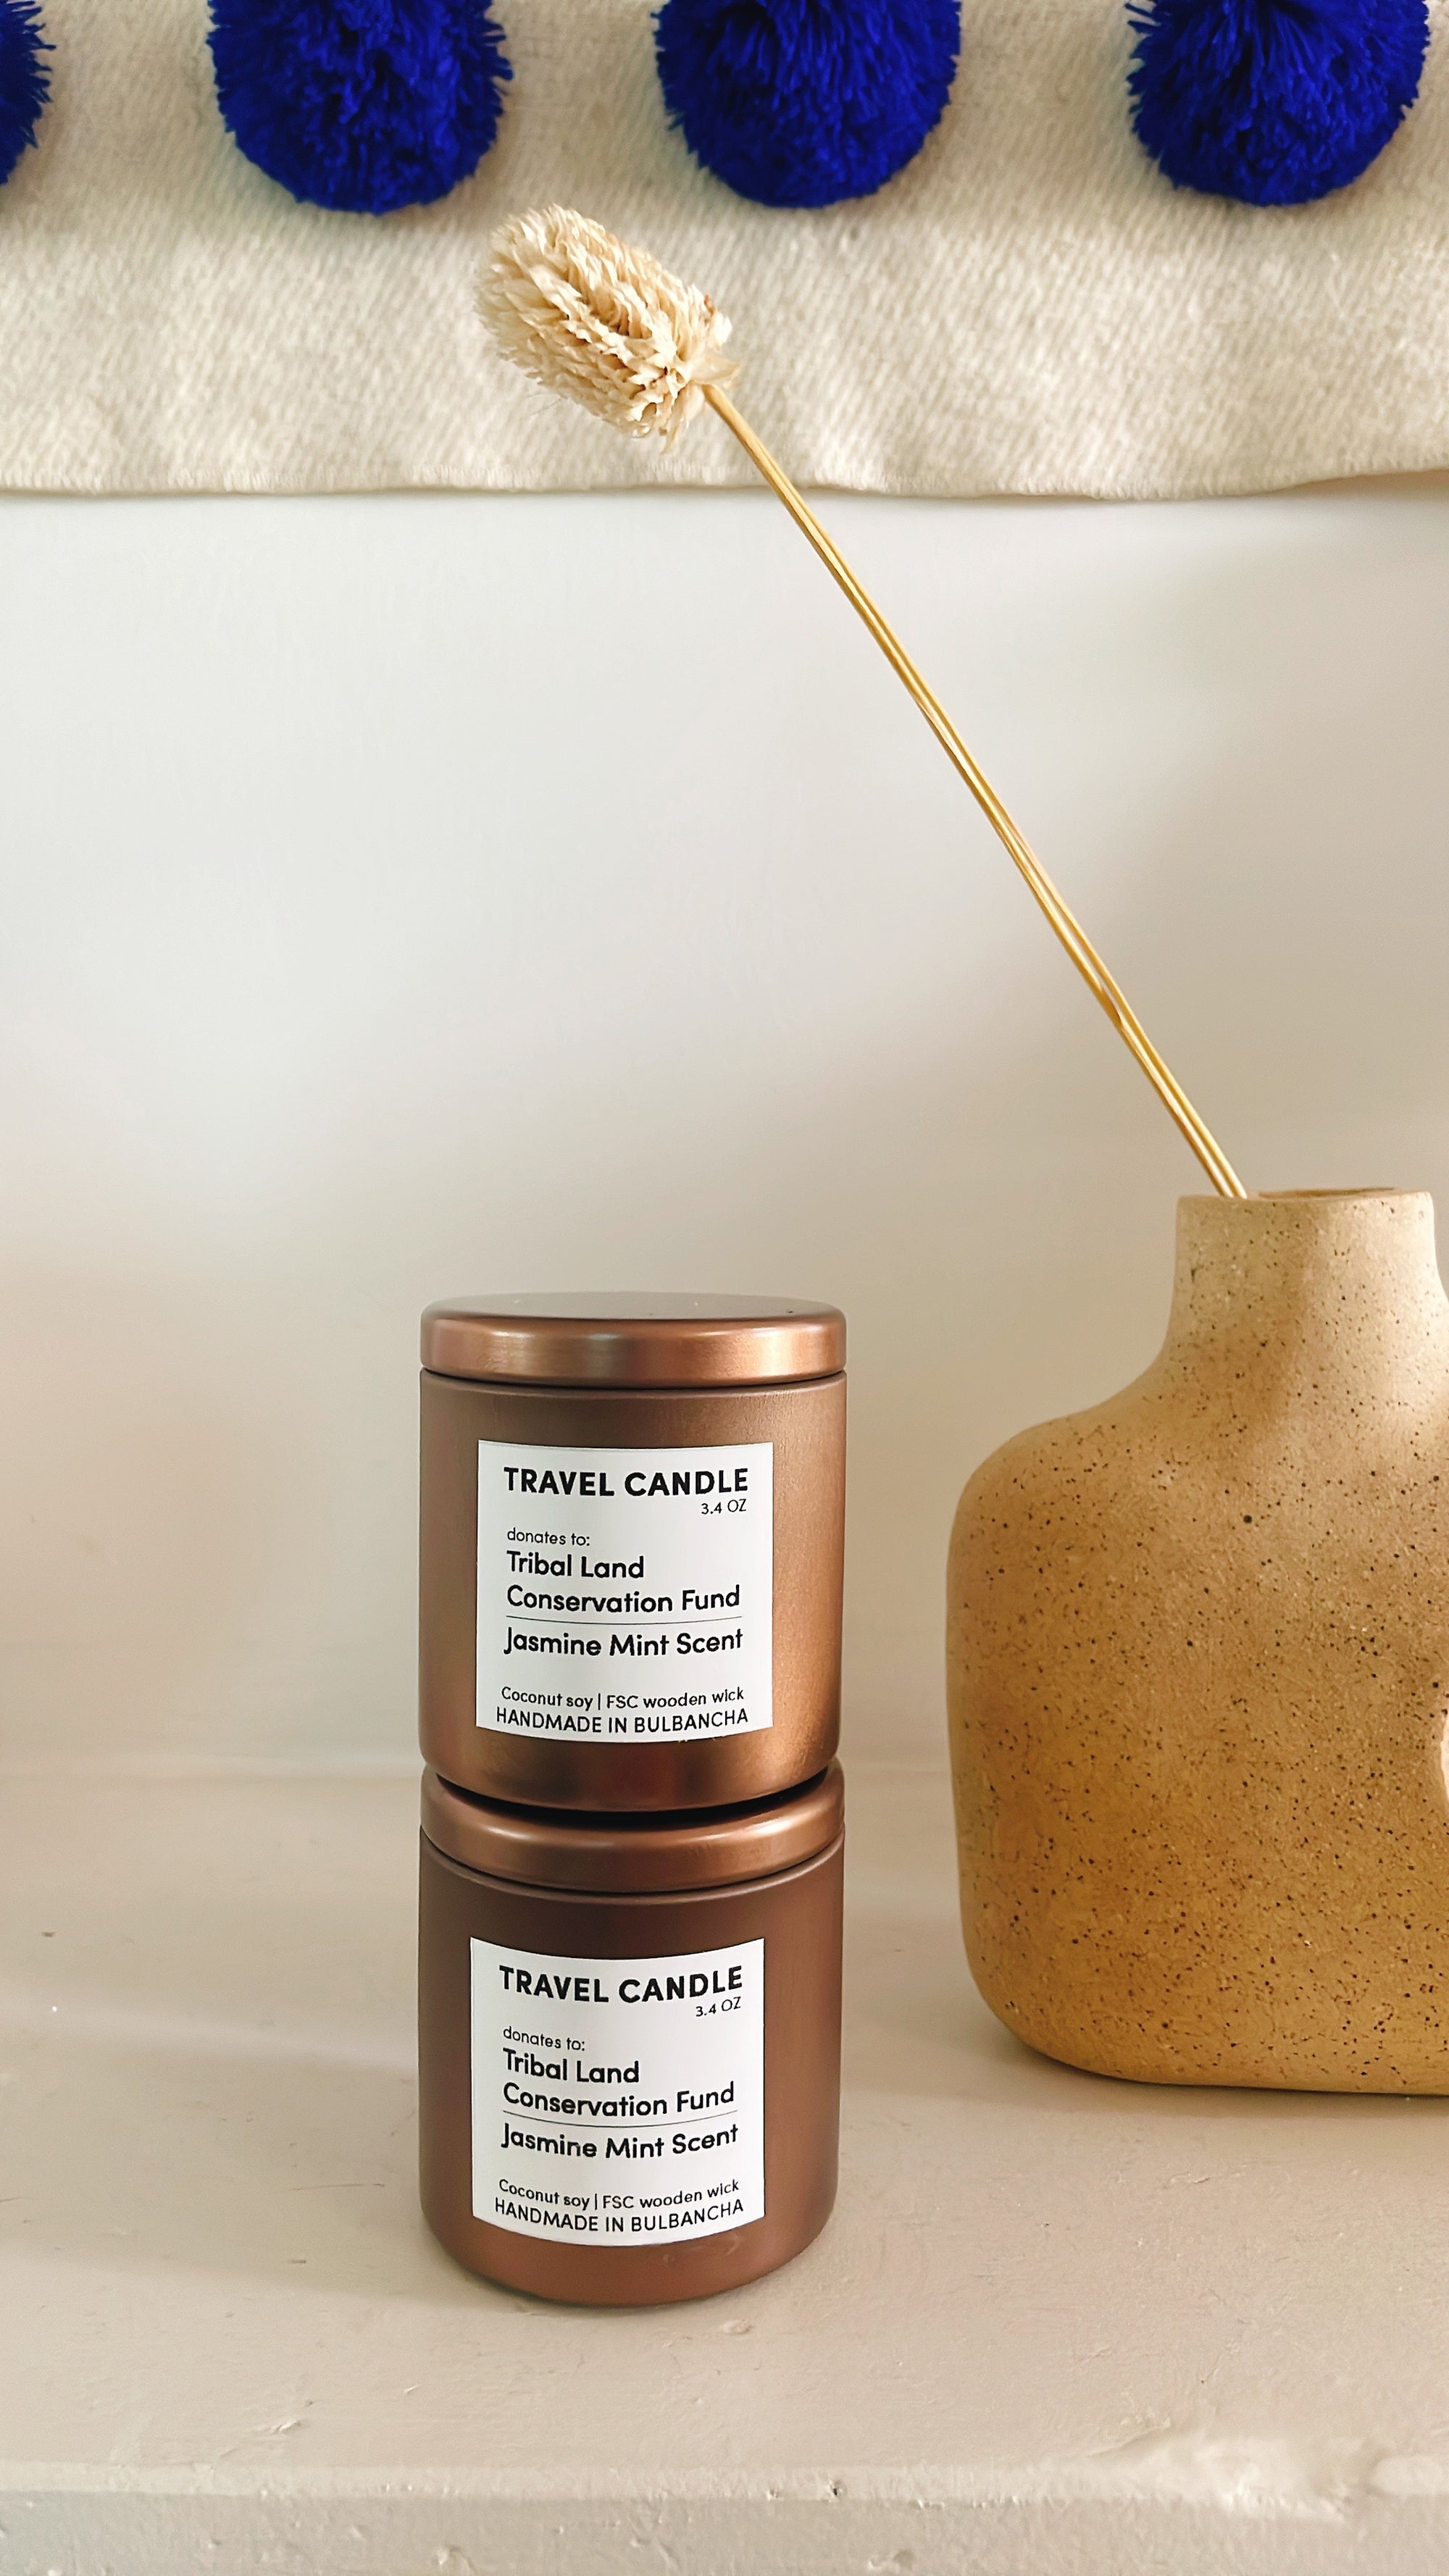 Travel Candle, donates to Tribal Land Conservation Fund / Jasmine Mint Scent